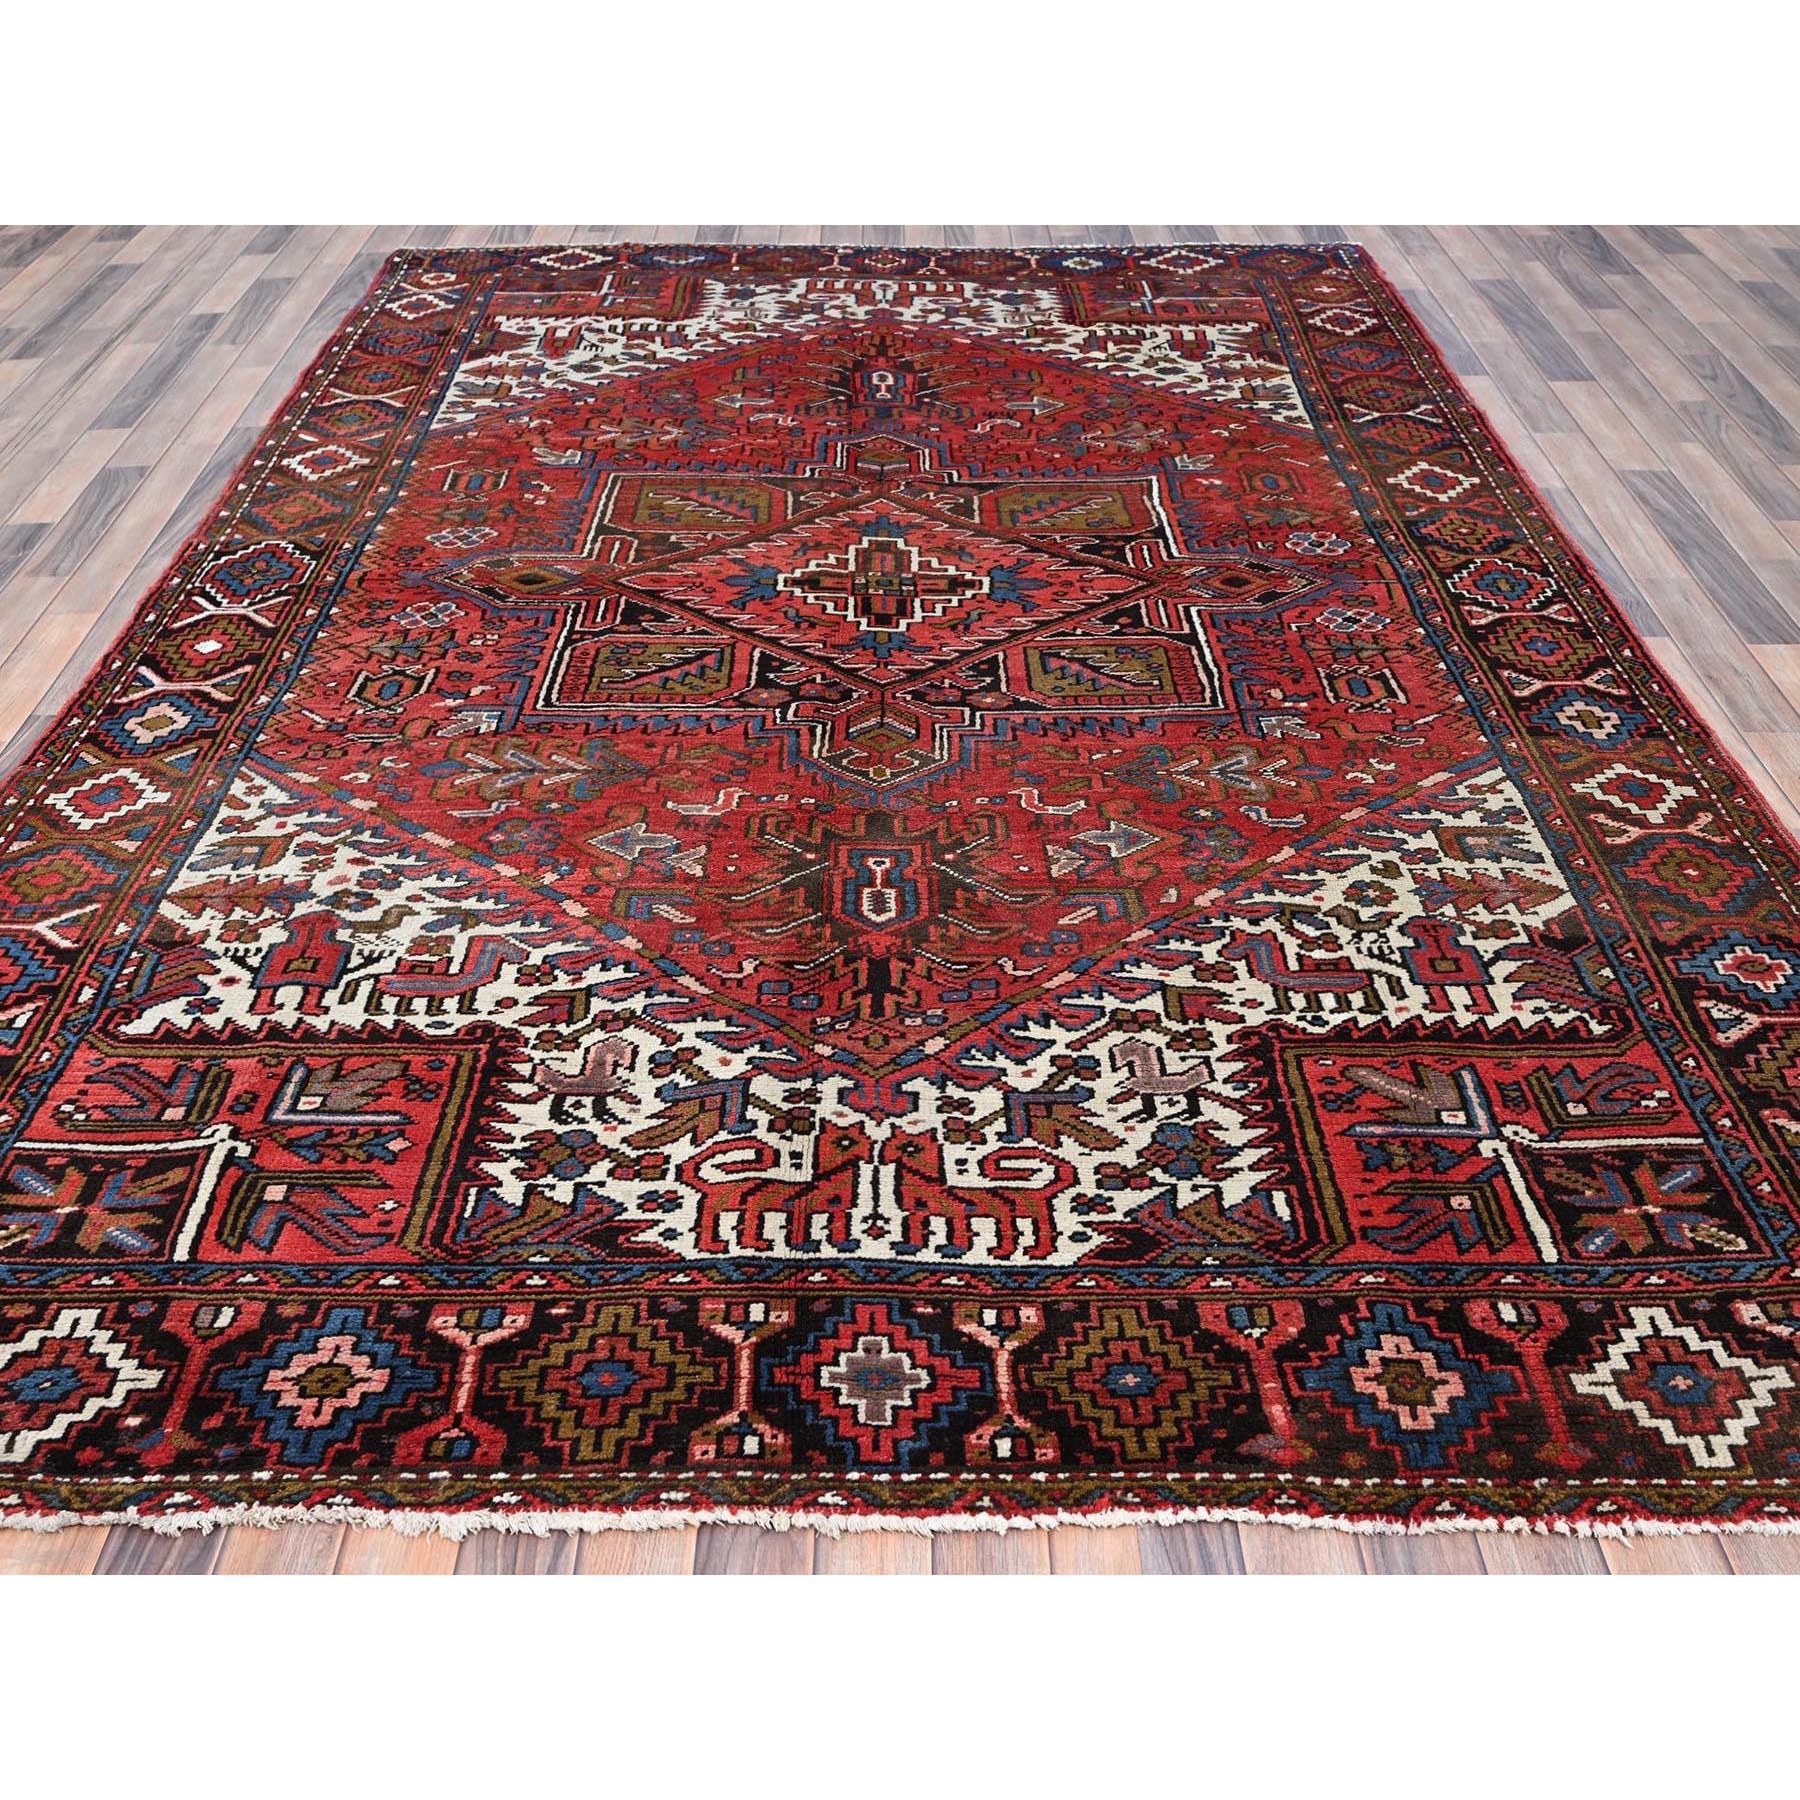 Medieval Red Clean Pure Wool Worn Down Vintage Vintage Persian Heriz Hand Knotted Rug For Sale